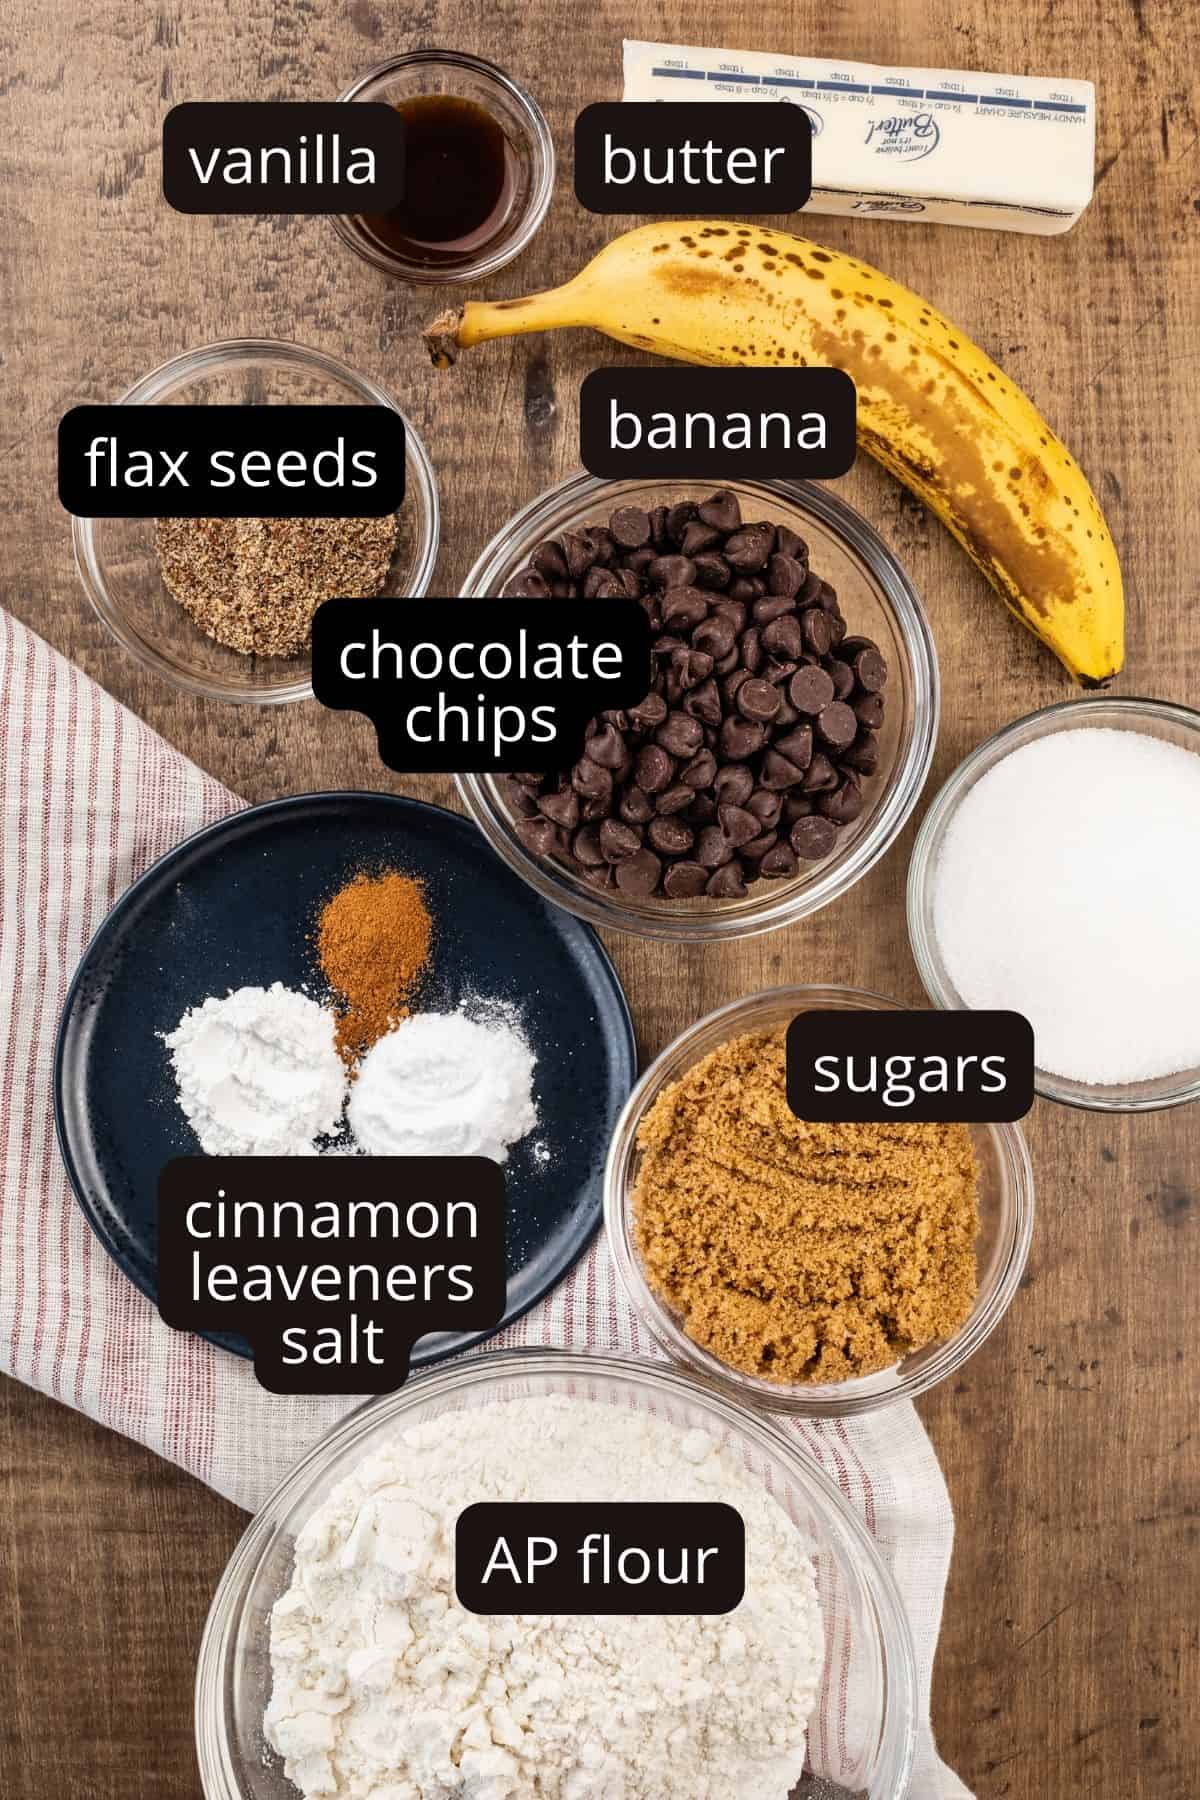 ingredients for vegan banana chocolate chip cookies in various glass bowls on the wood tabletop. a red and white strip towel in under some of the bowls. black and white labels tell you what the ingredients are.